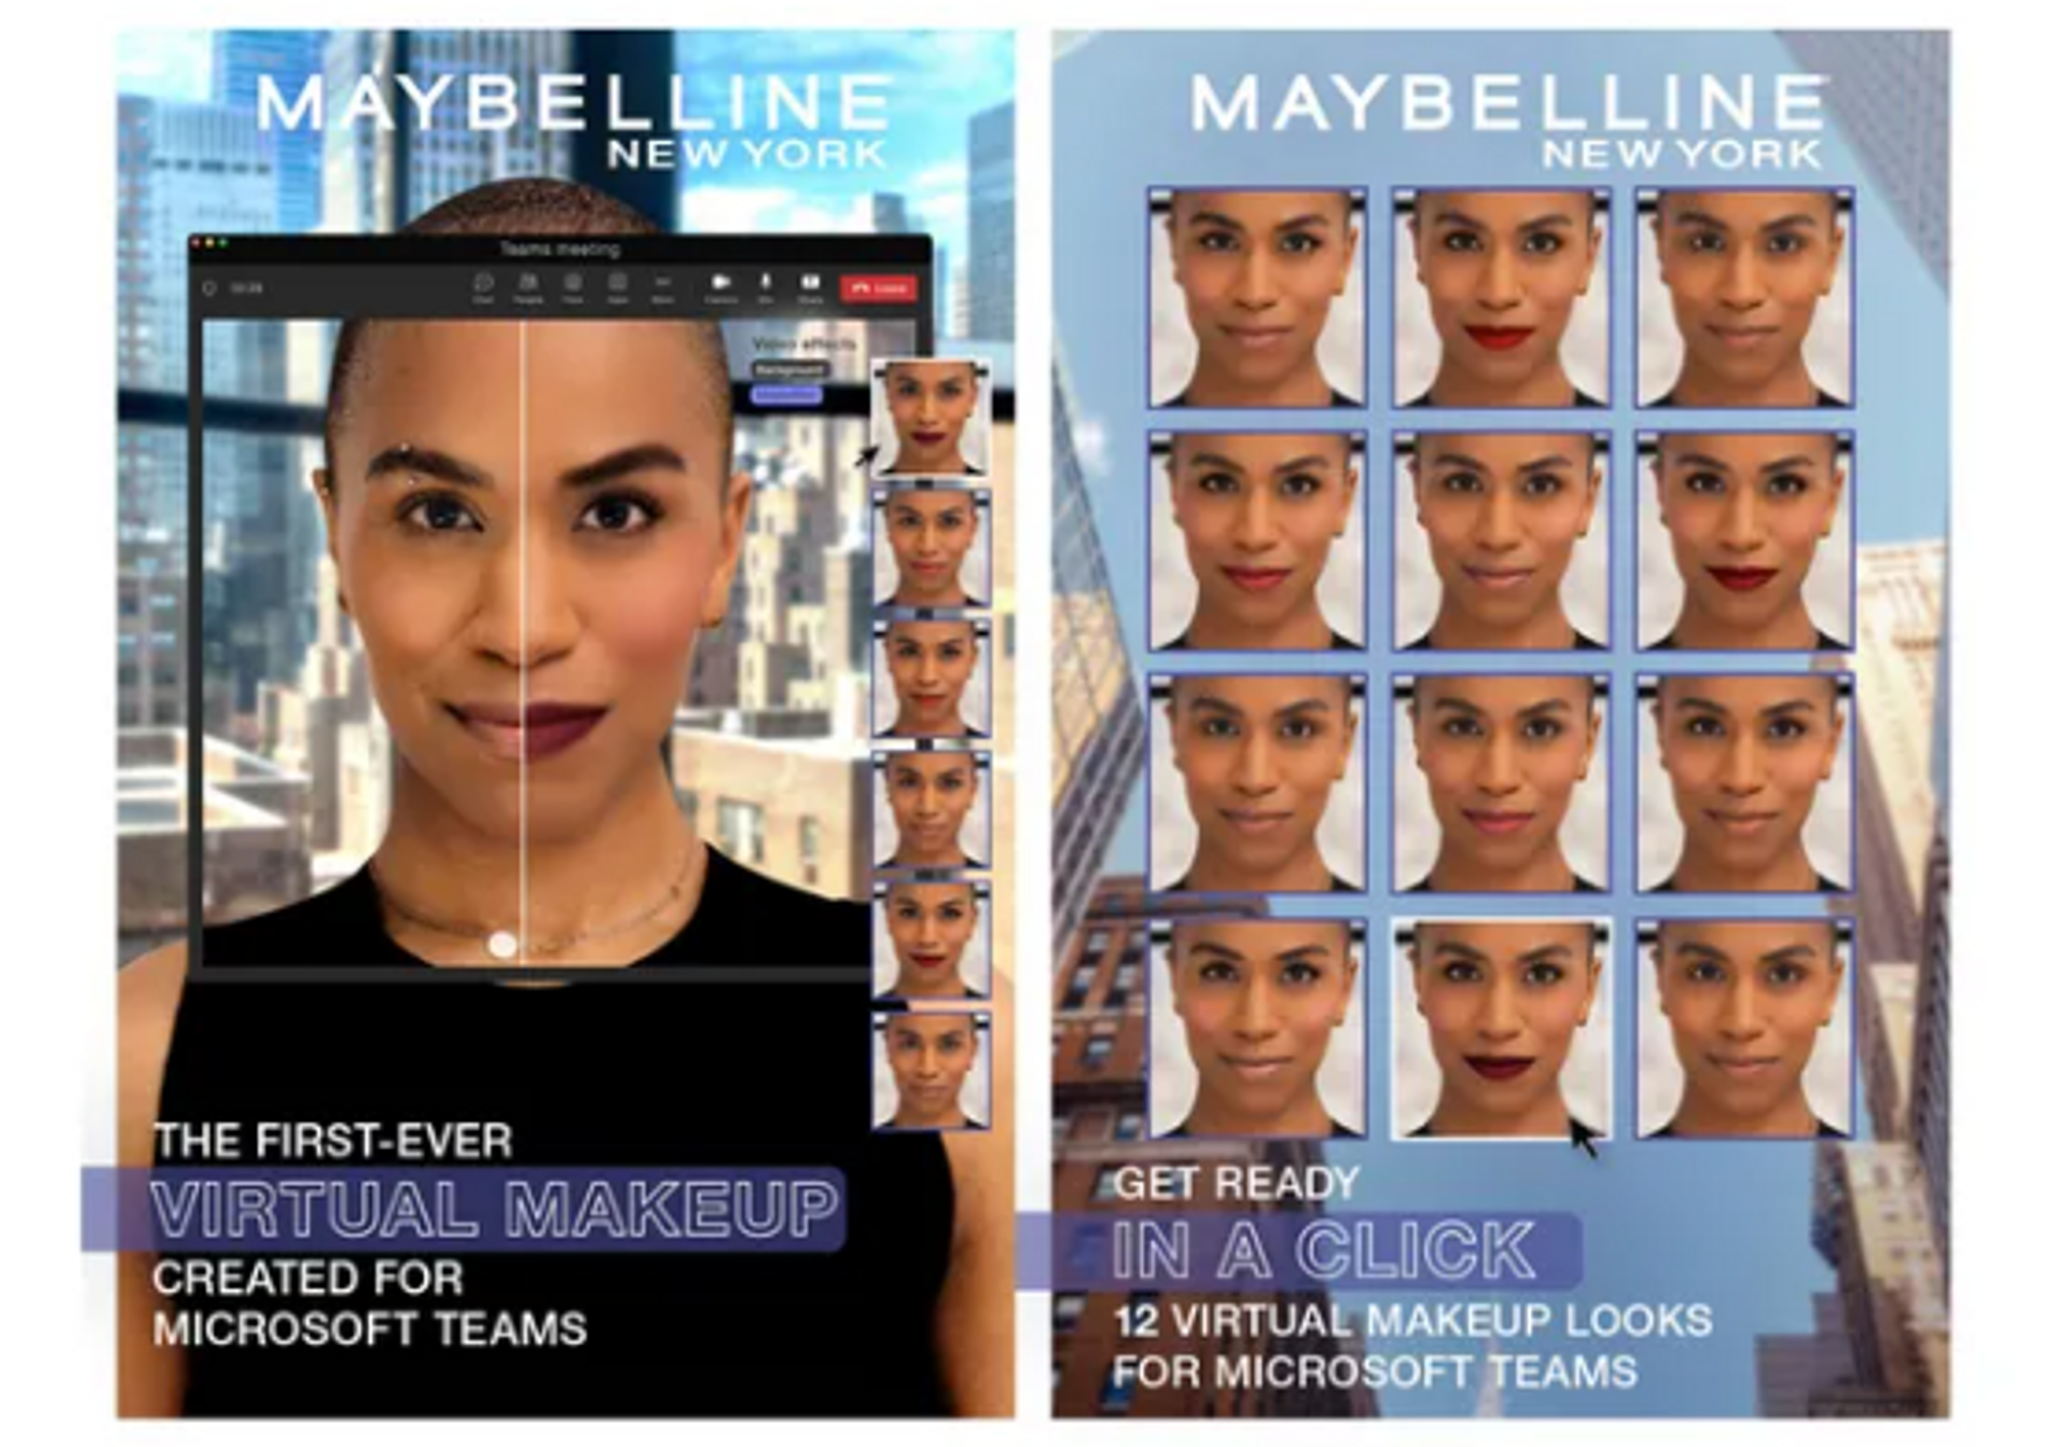 Maybelline launches AI makeup filter for Microsoft Teams